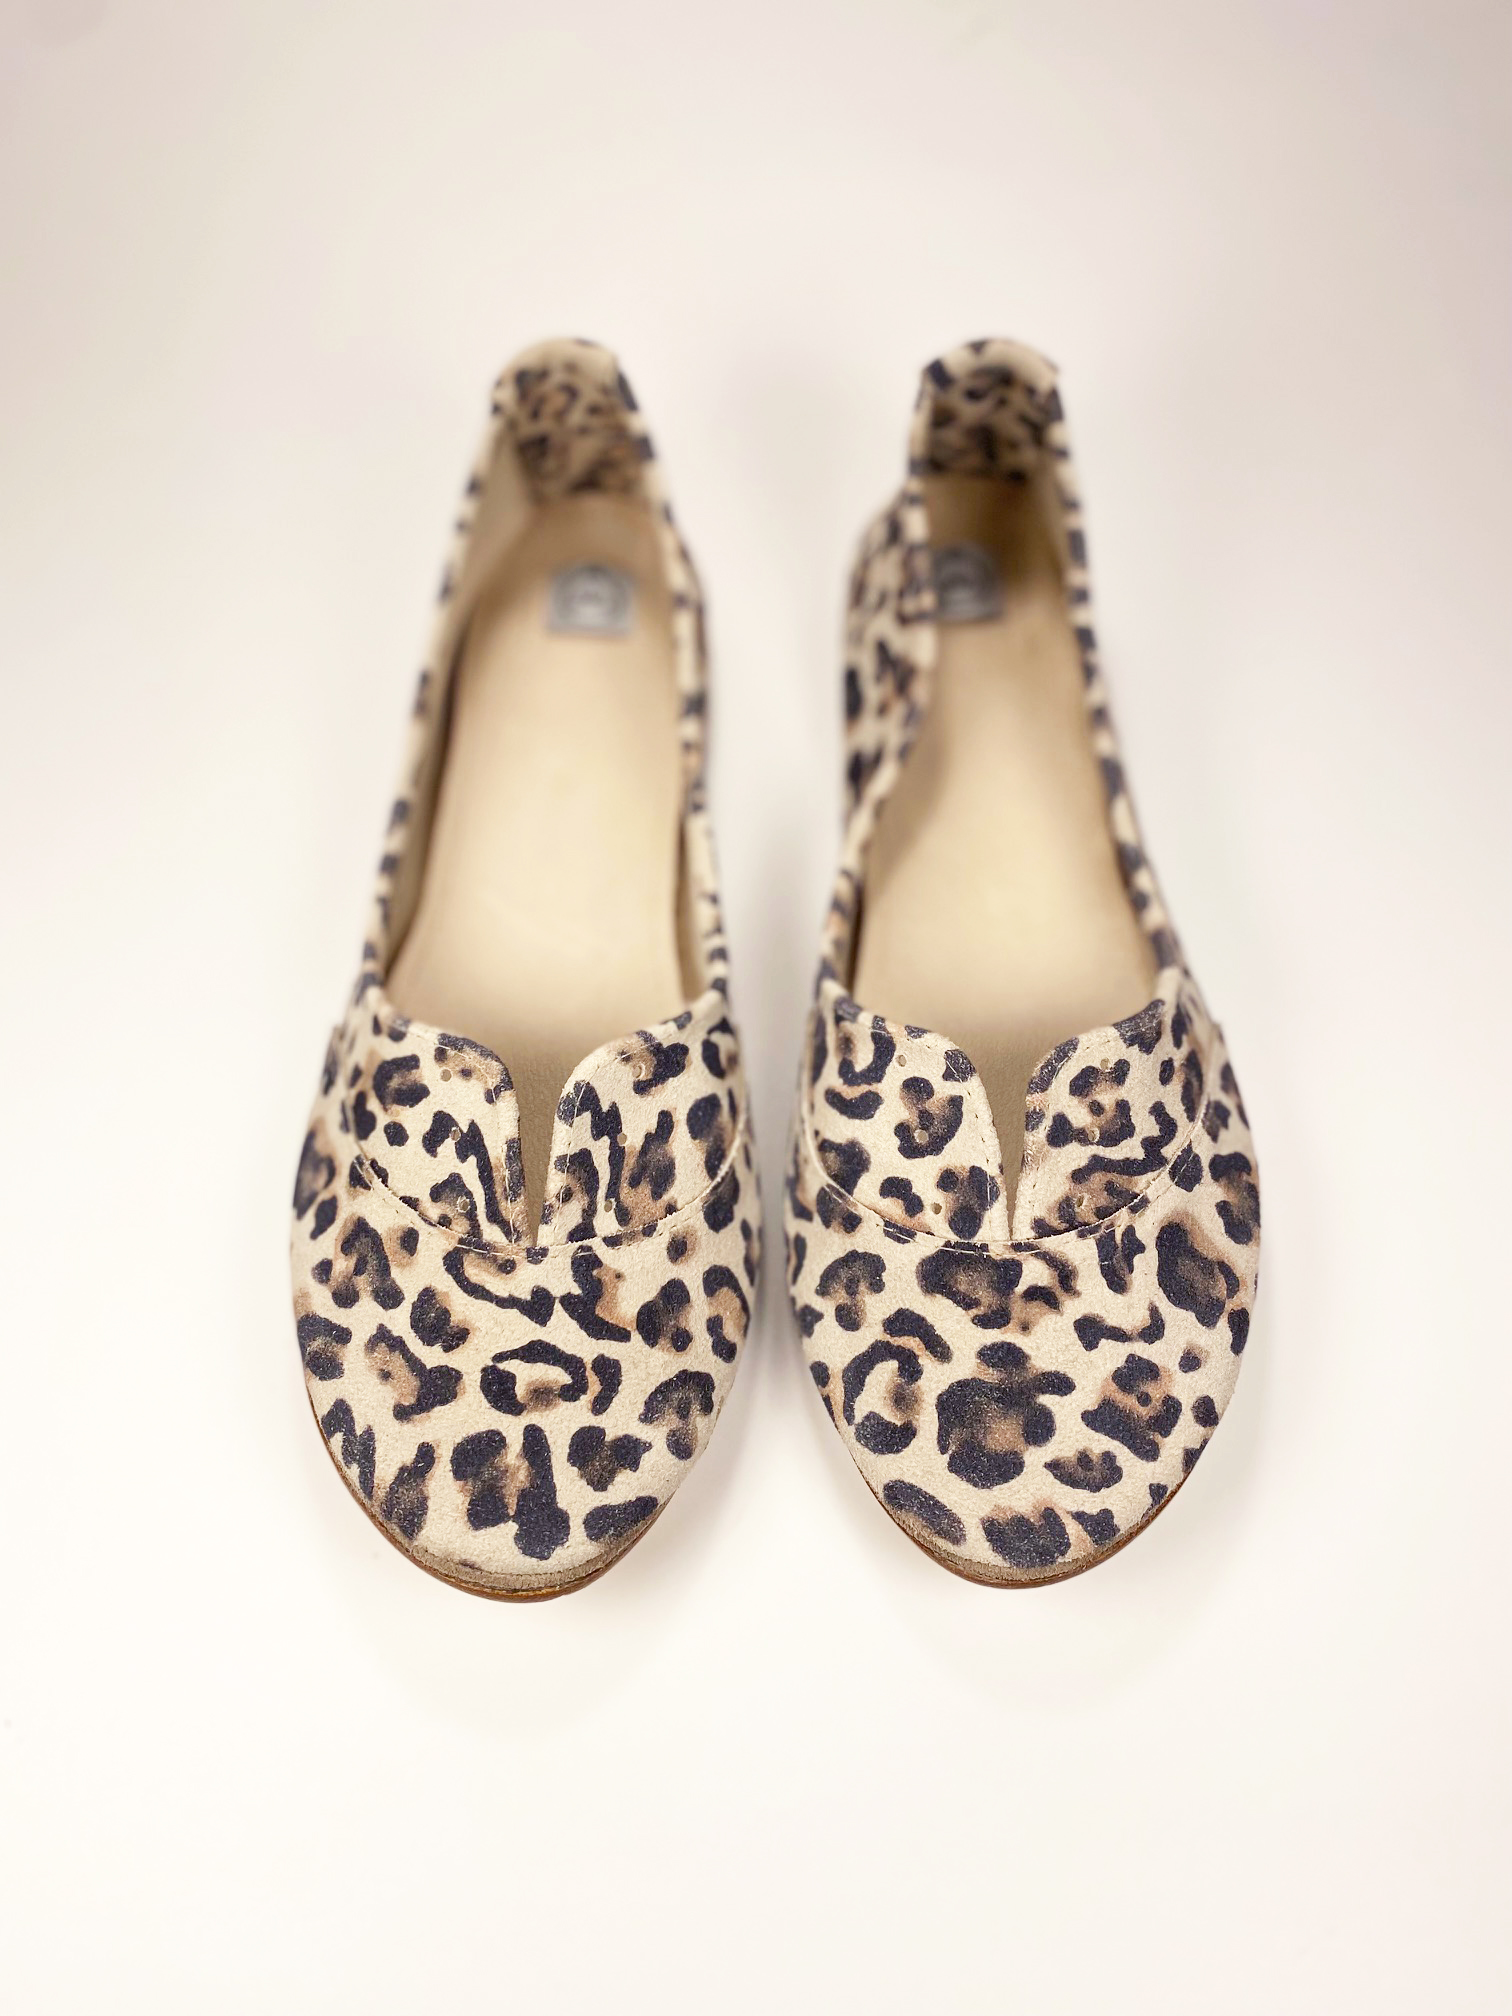 Leopard Shoes, Oxfords Lace up Shoes in Natural Color Leather, Animal Print, Elehandmade